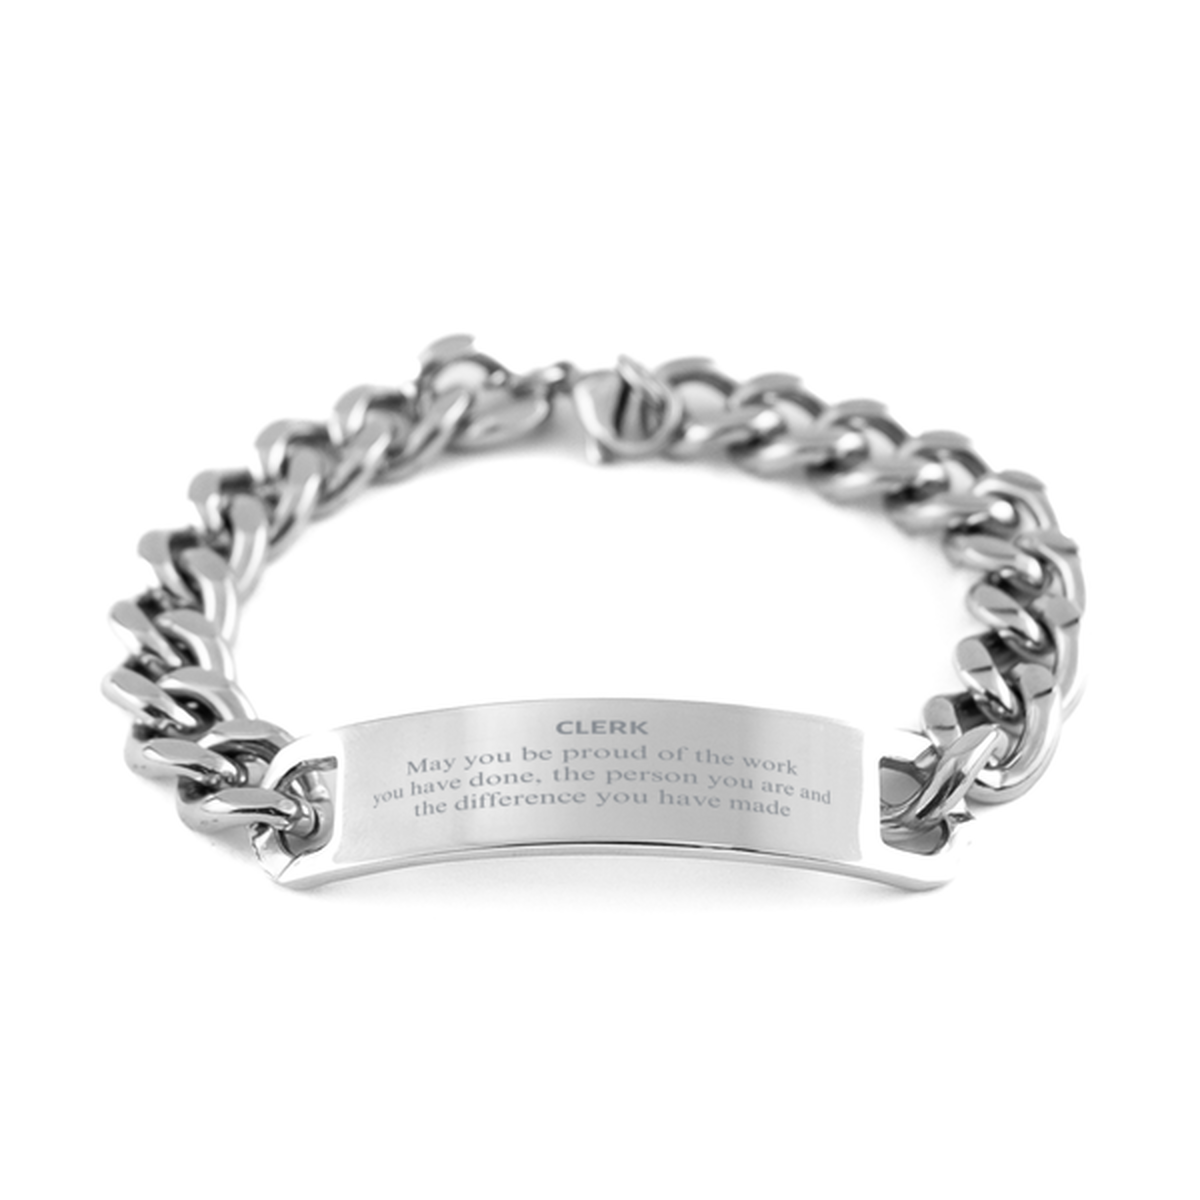 Clerk May you be proud of the work you have done, Retirement Clerk Cuban Chain Stainless Steel Bracelet for Colleague Appreciation Gifts Amazing for Clerk